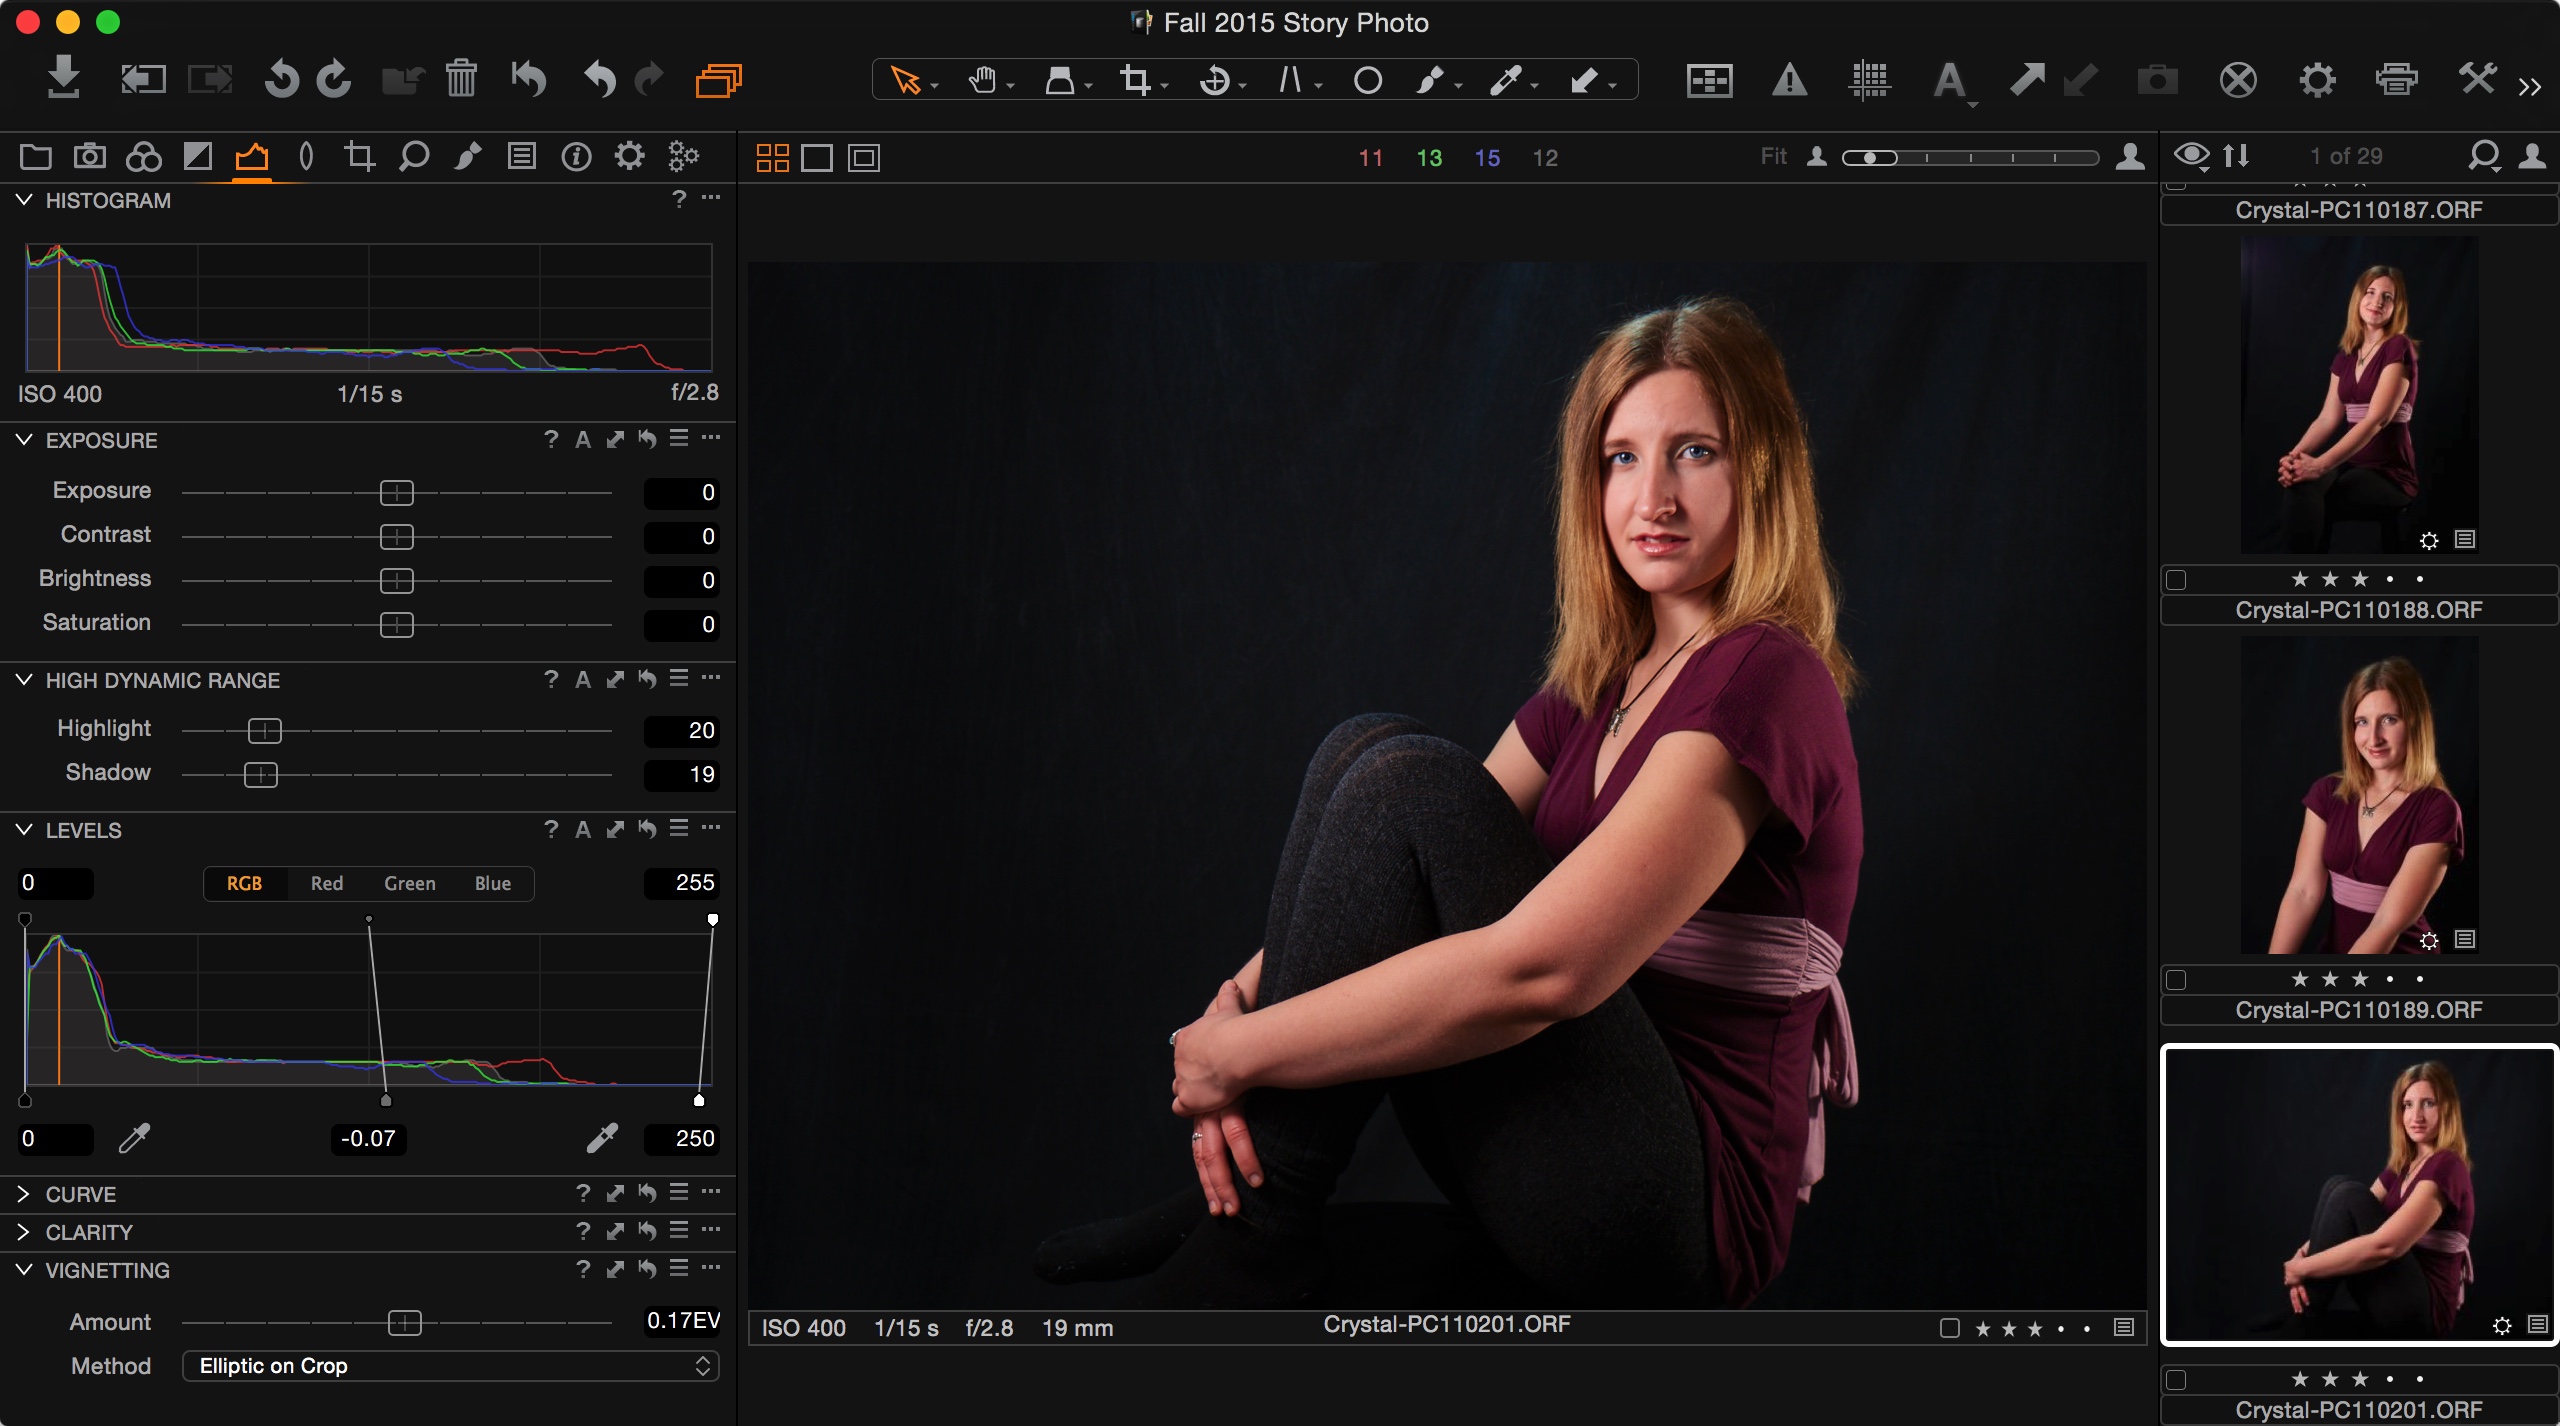 capture one 23 release date